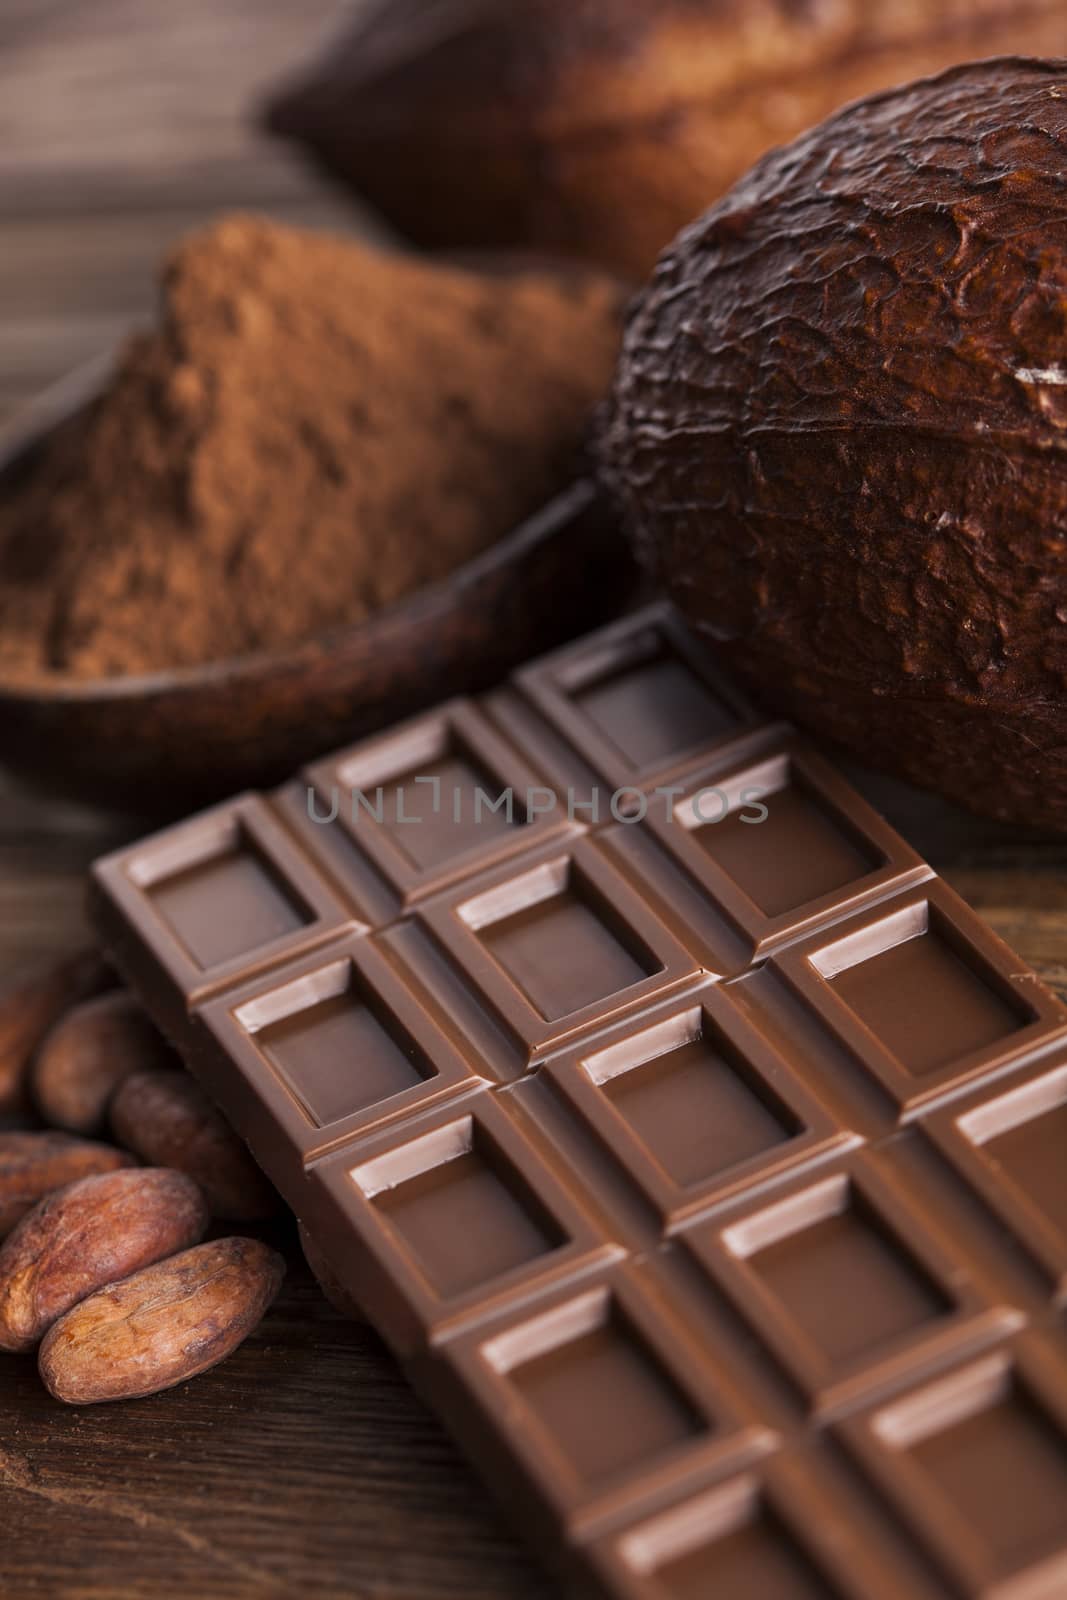 Cocoa pod and chocolate bar and food dessert background by JanPietruszka